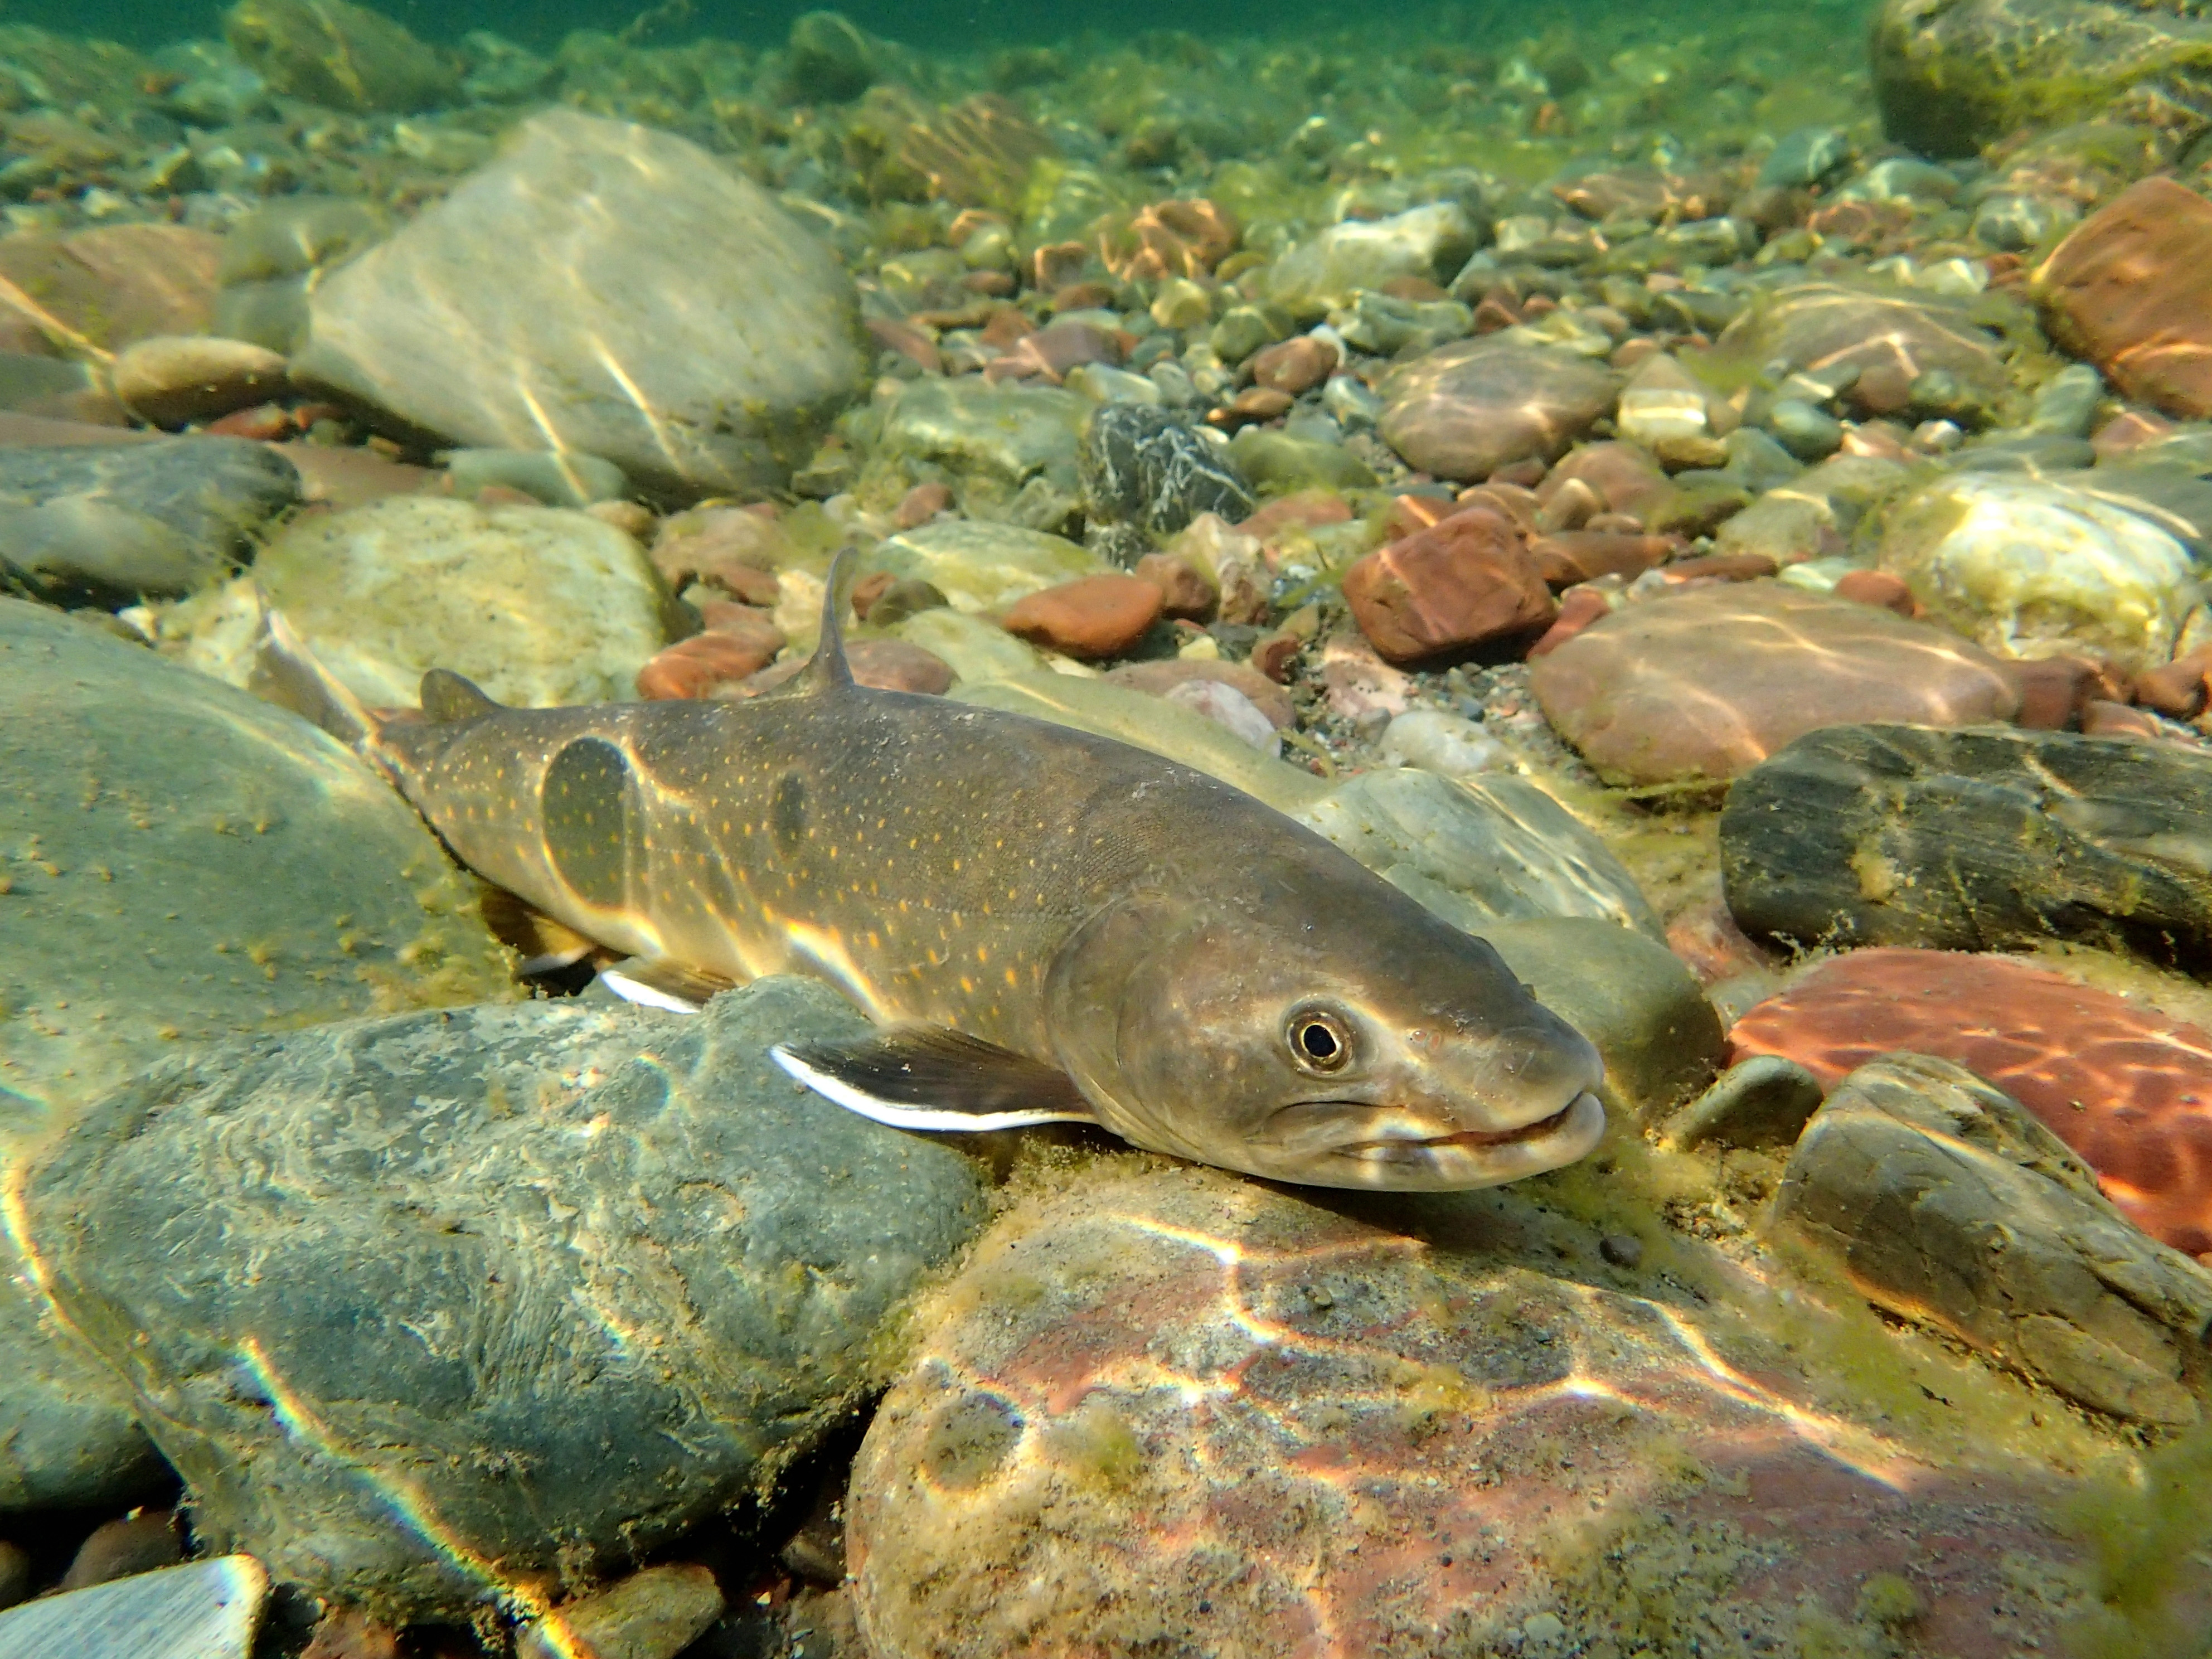 A Bull Trout swims in the Middle Fork of the Flathead River near Essex